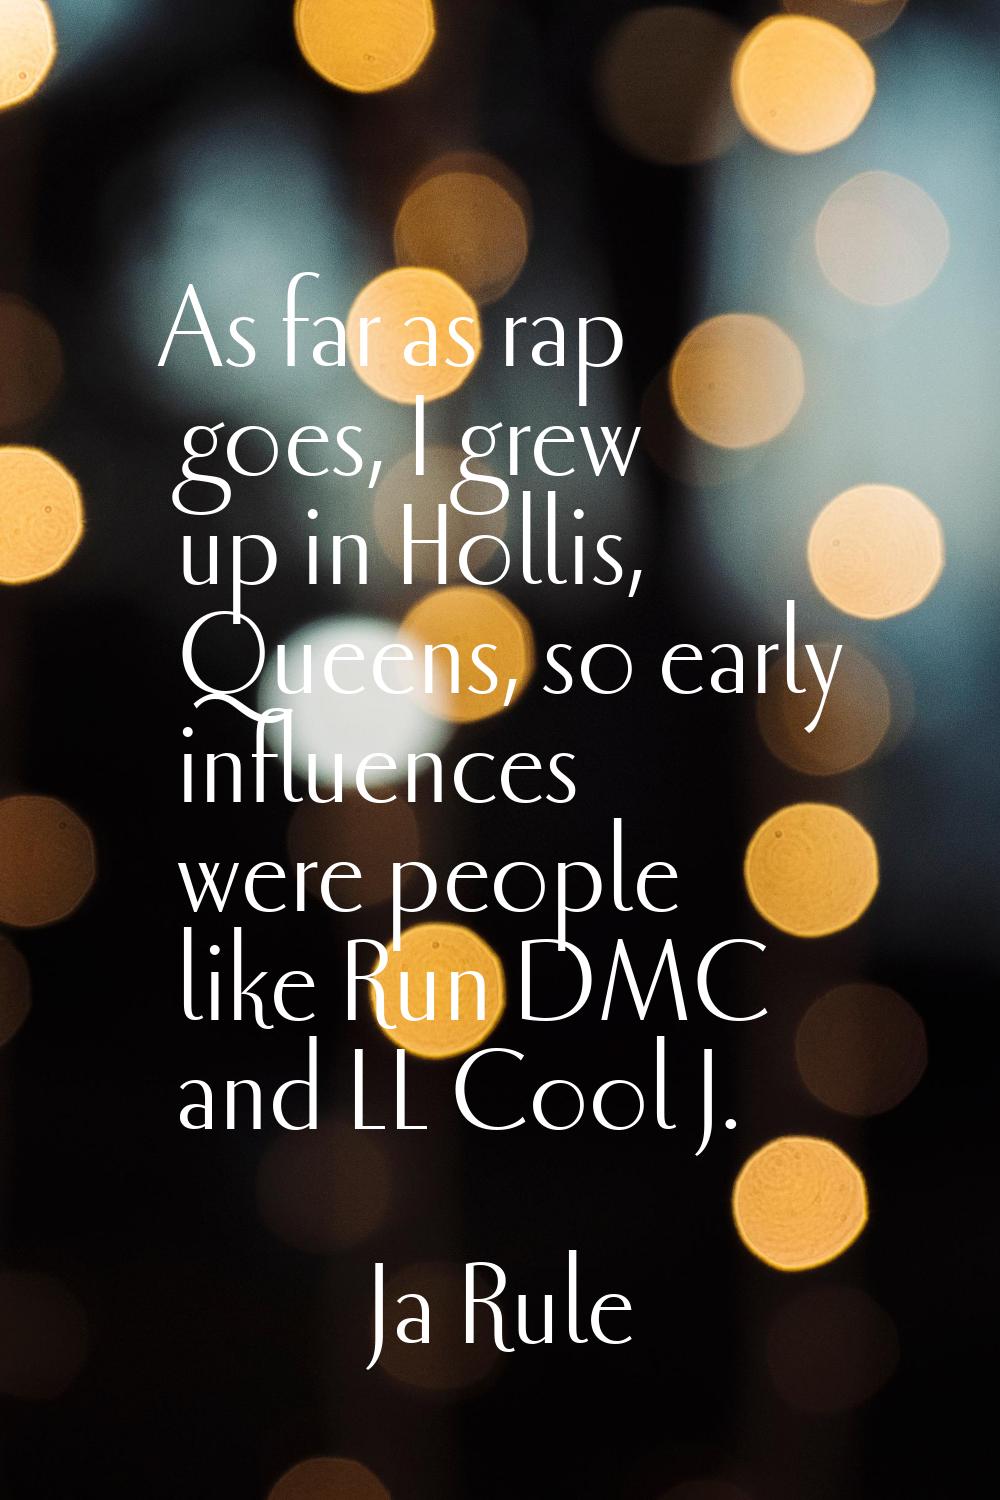 As far as rap goes, I grew up in Hollis, Queens, so early influences were people like Run DMC and L